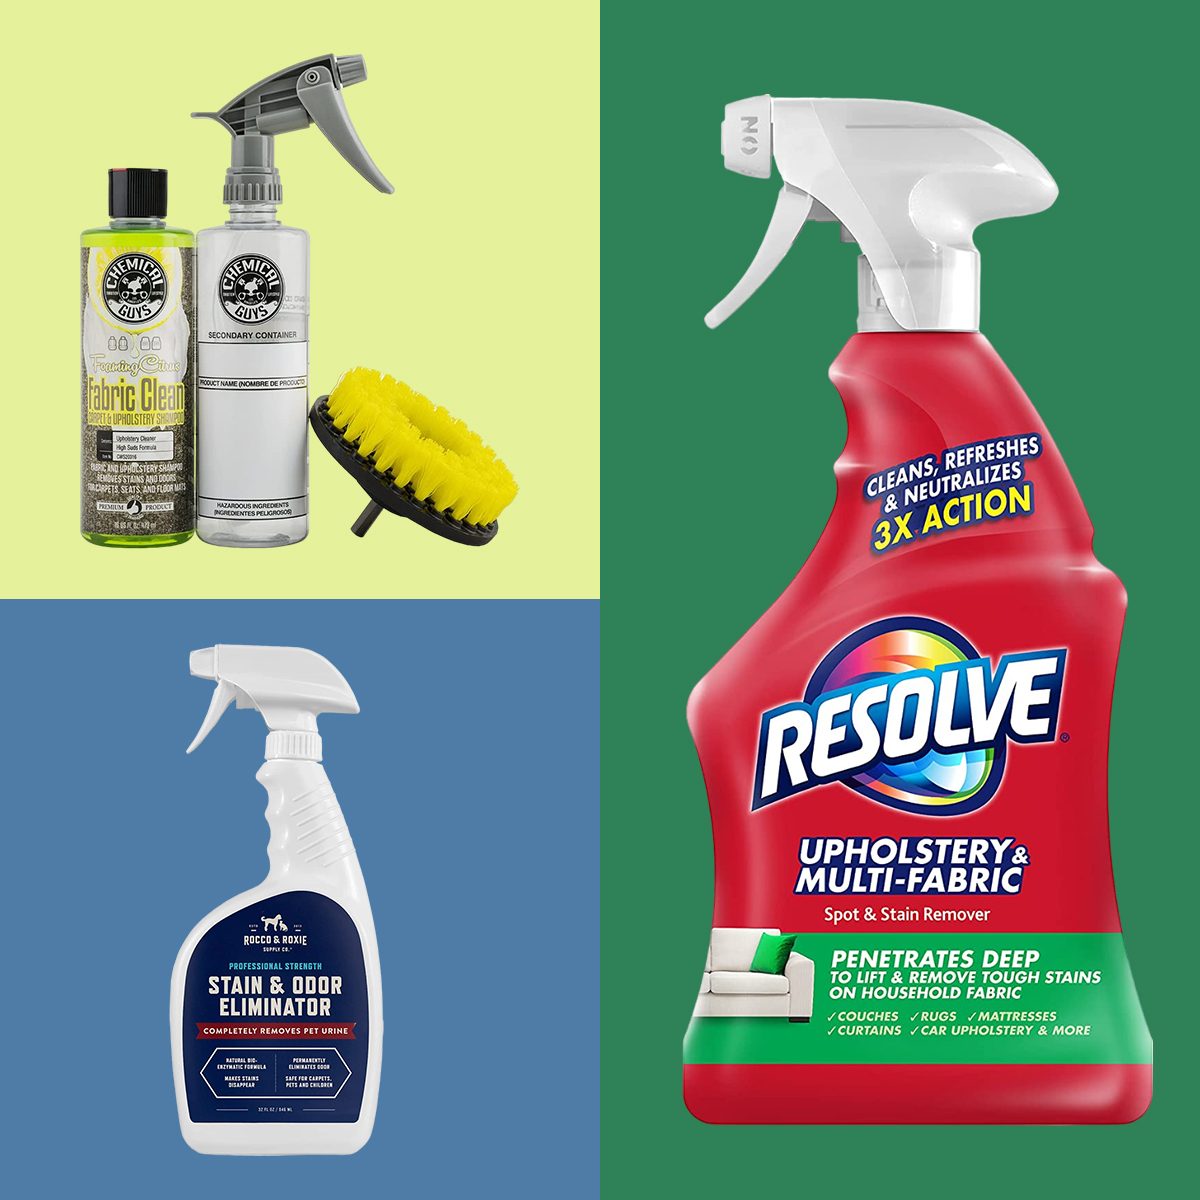 Car Carpet Stain Remover Products on the Market - Best Top 3